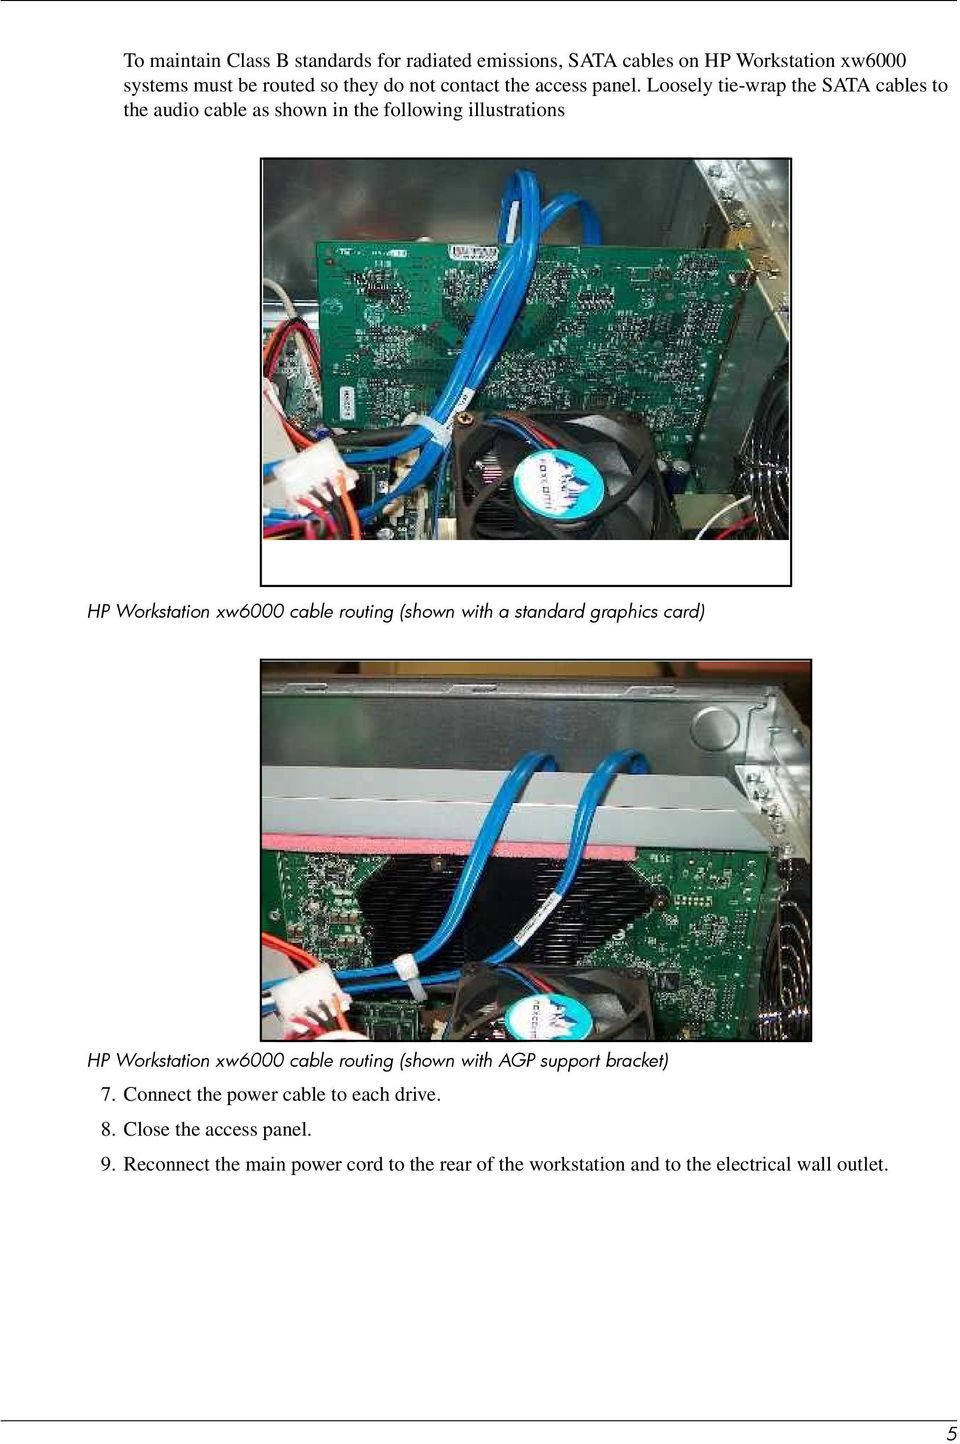 Loosely tie-wrap the SATA cables to the audio cable as shown in the following illustrations HP Workstation xw6000 cable routing (shown with